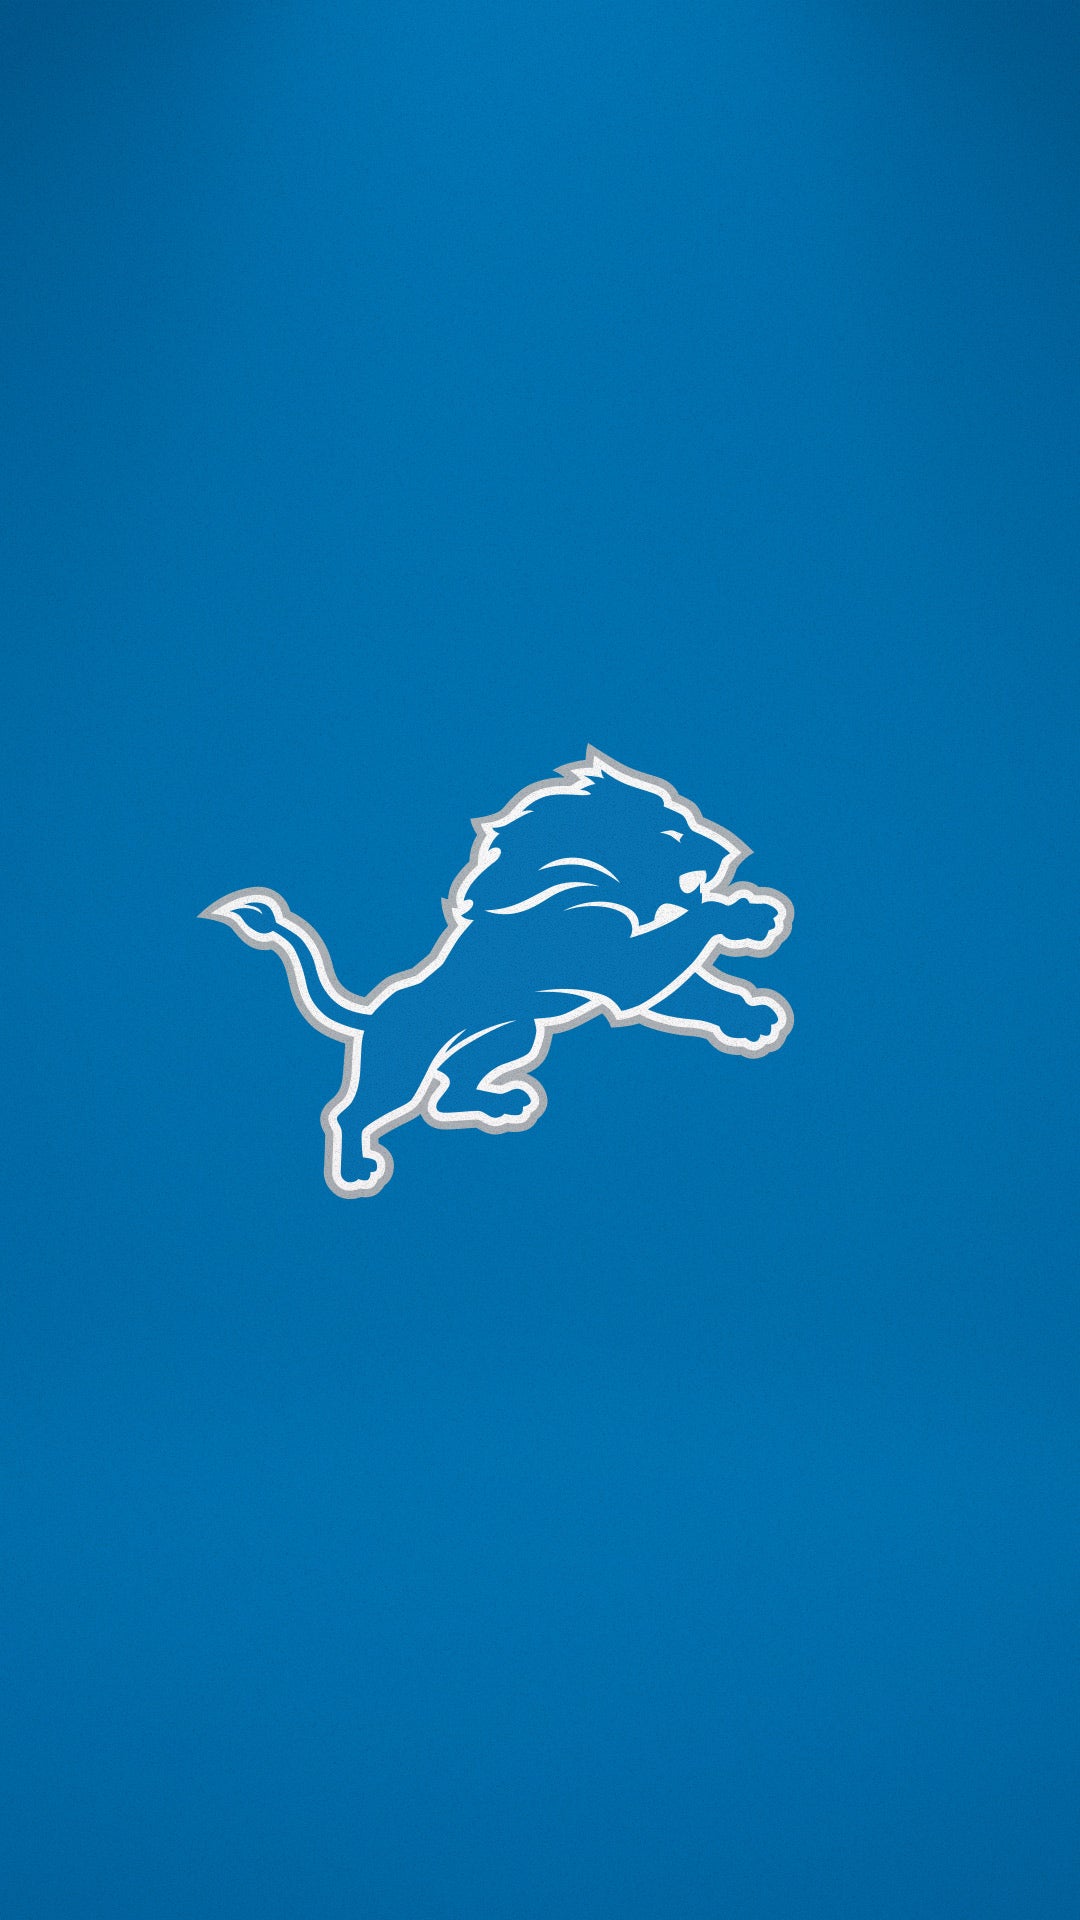 Lion Wallpapers - Apps on Google Play